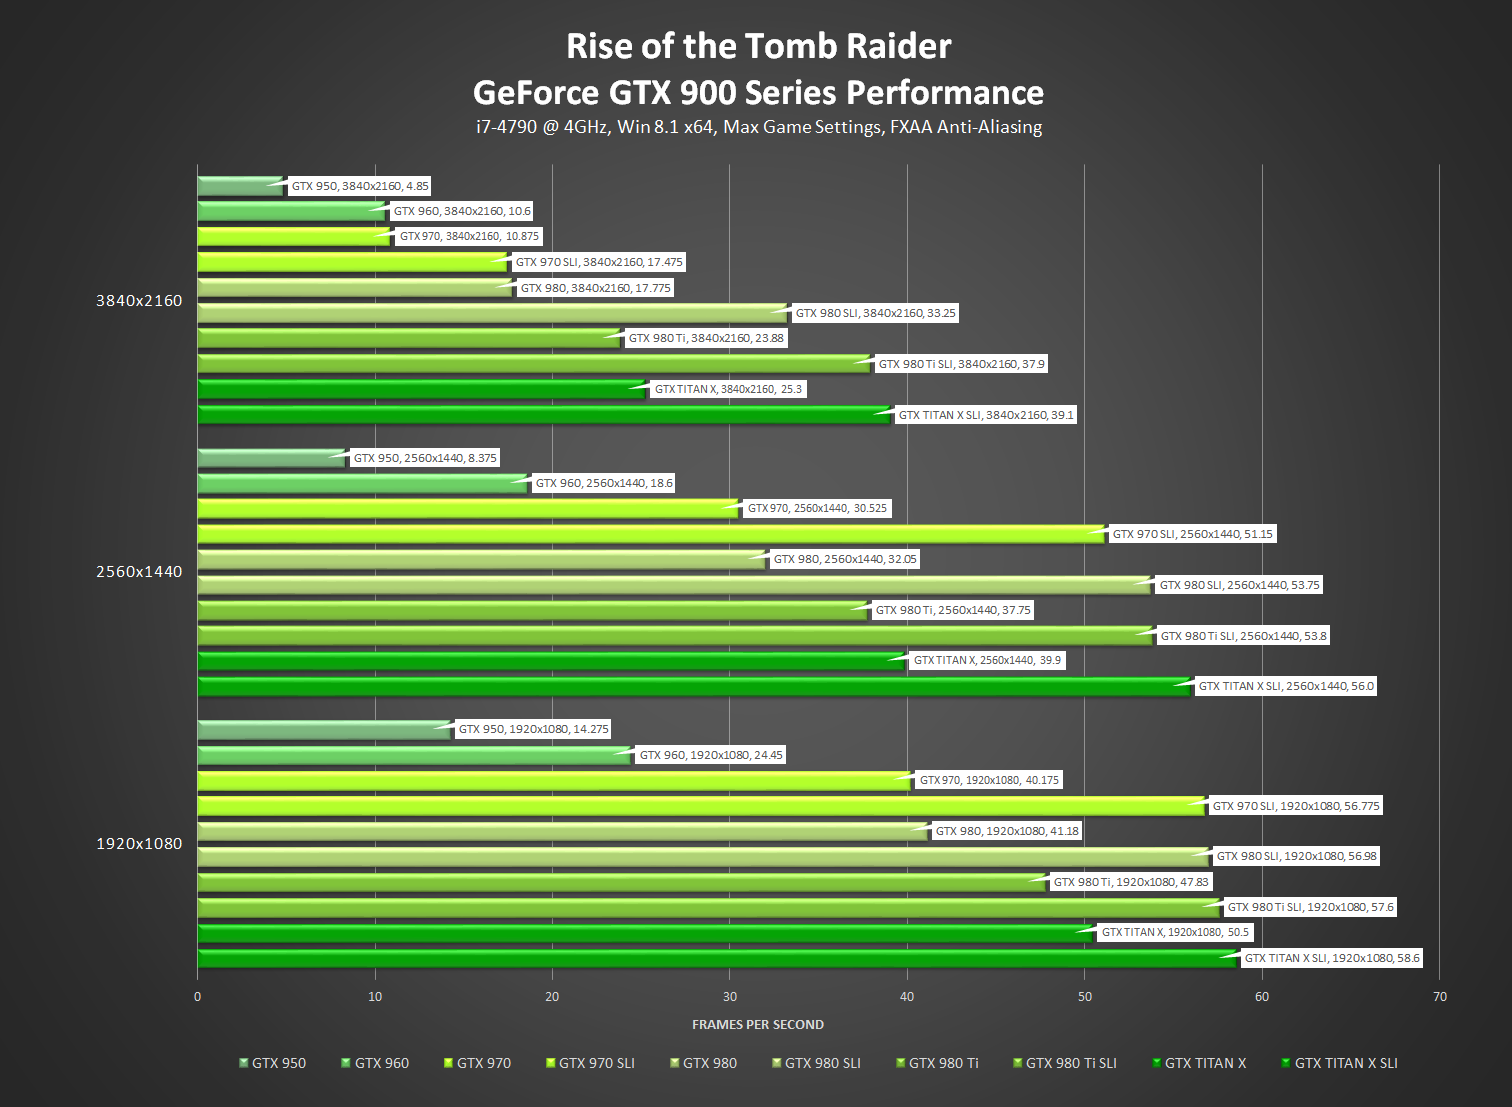 http://images.nvidia.com/geforce-com/international/images/rise-of-the-tomb-raider/rise-of-the-tomb-raider-nvidia-geforce-gtx-900-series-performance.png